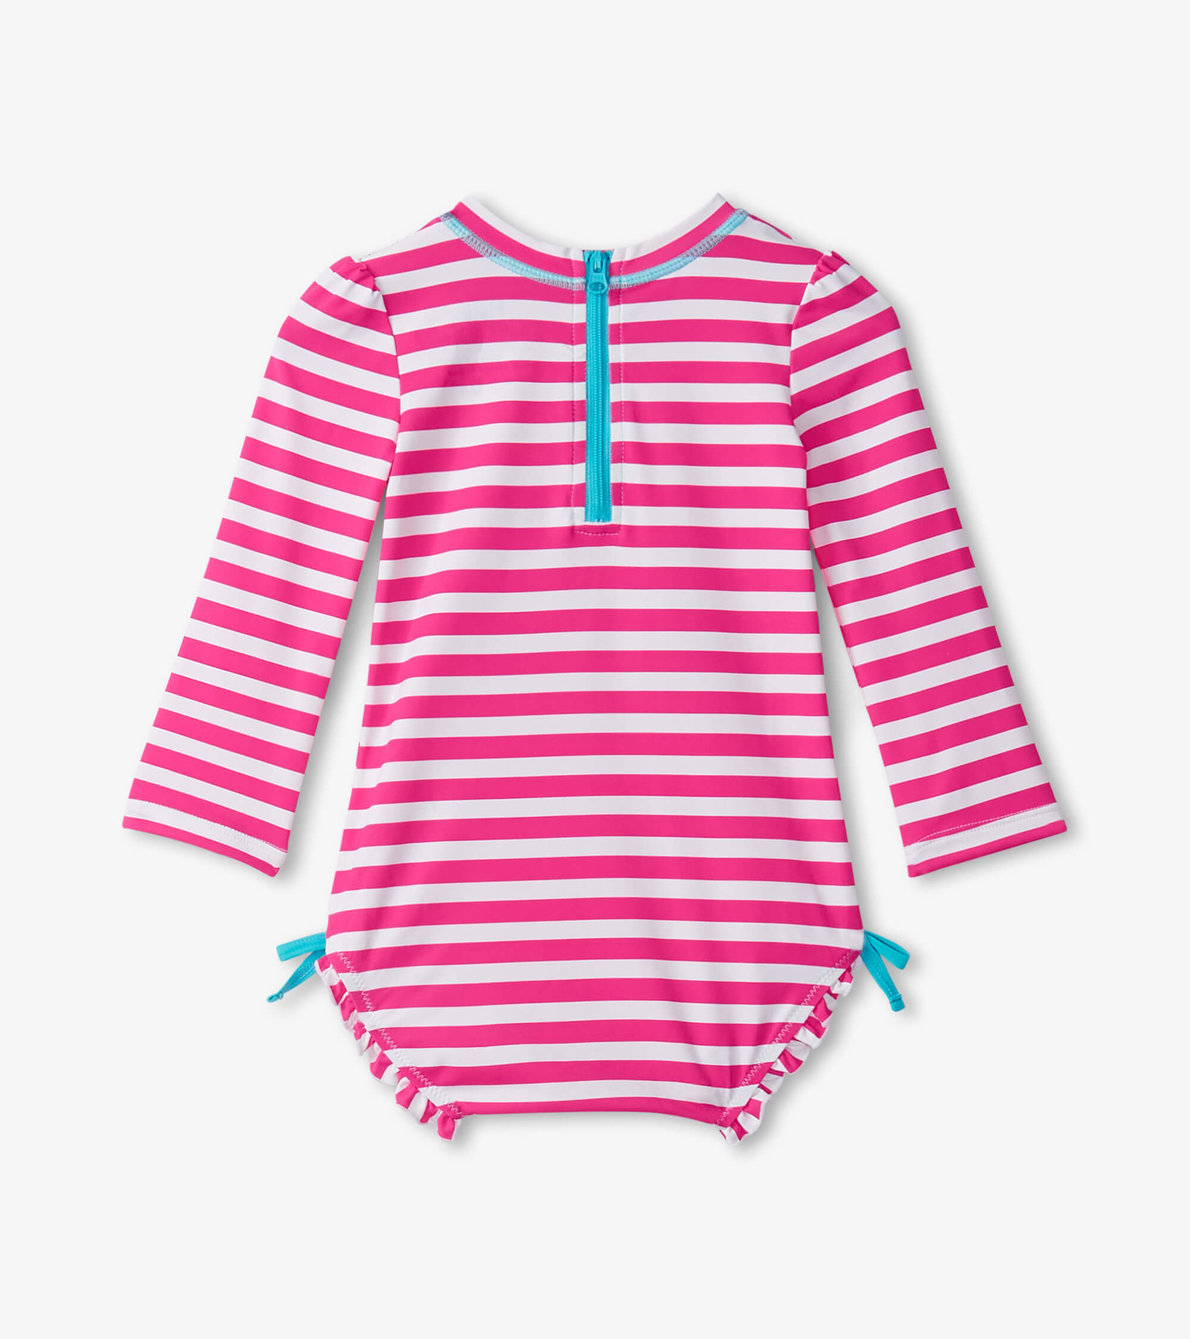 View larger image of Baby Girls Candy Stripes Rashguard Swimsuit